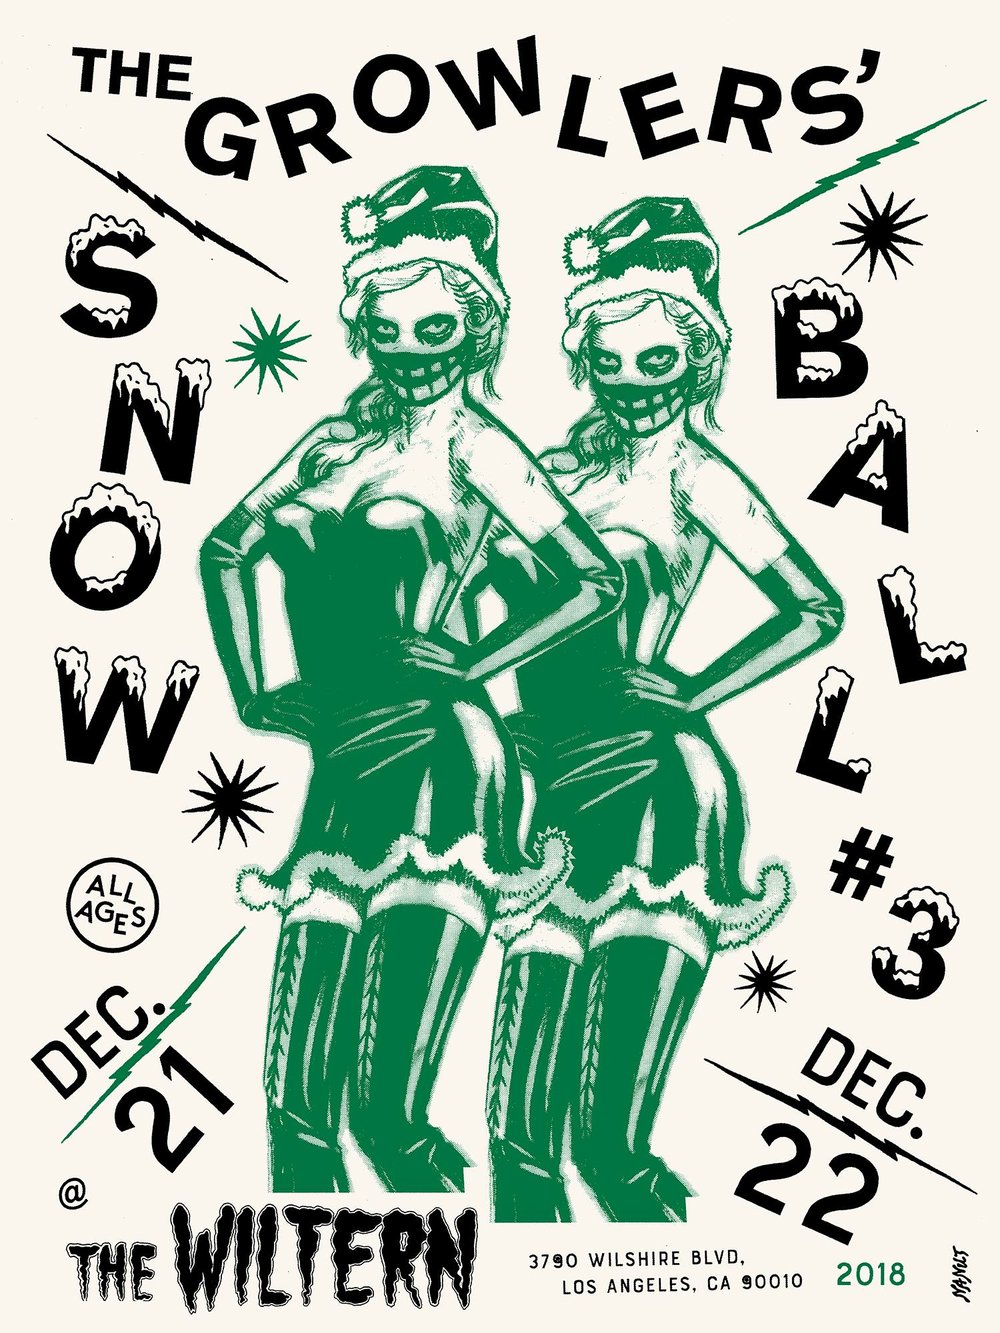 The Growlers Snow Ball #3 Poster, Green.